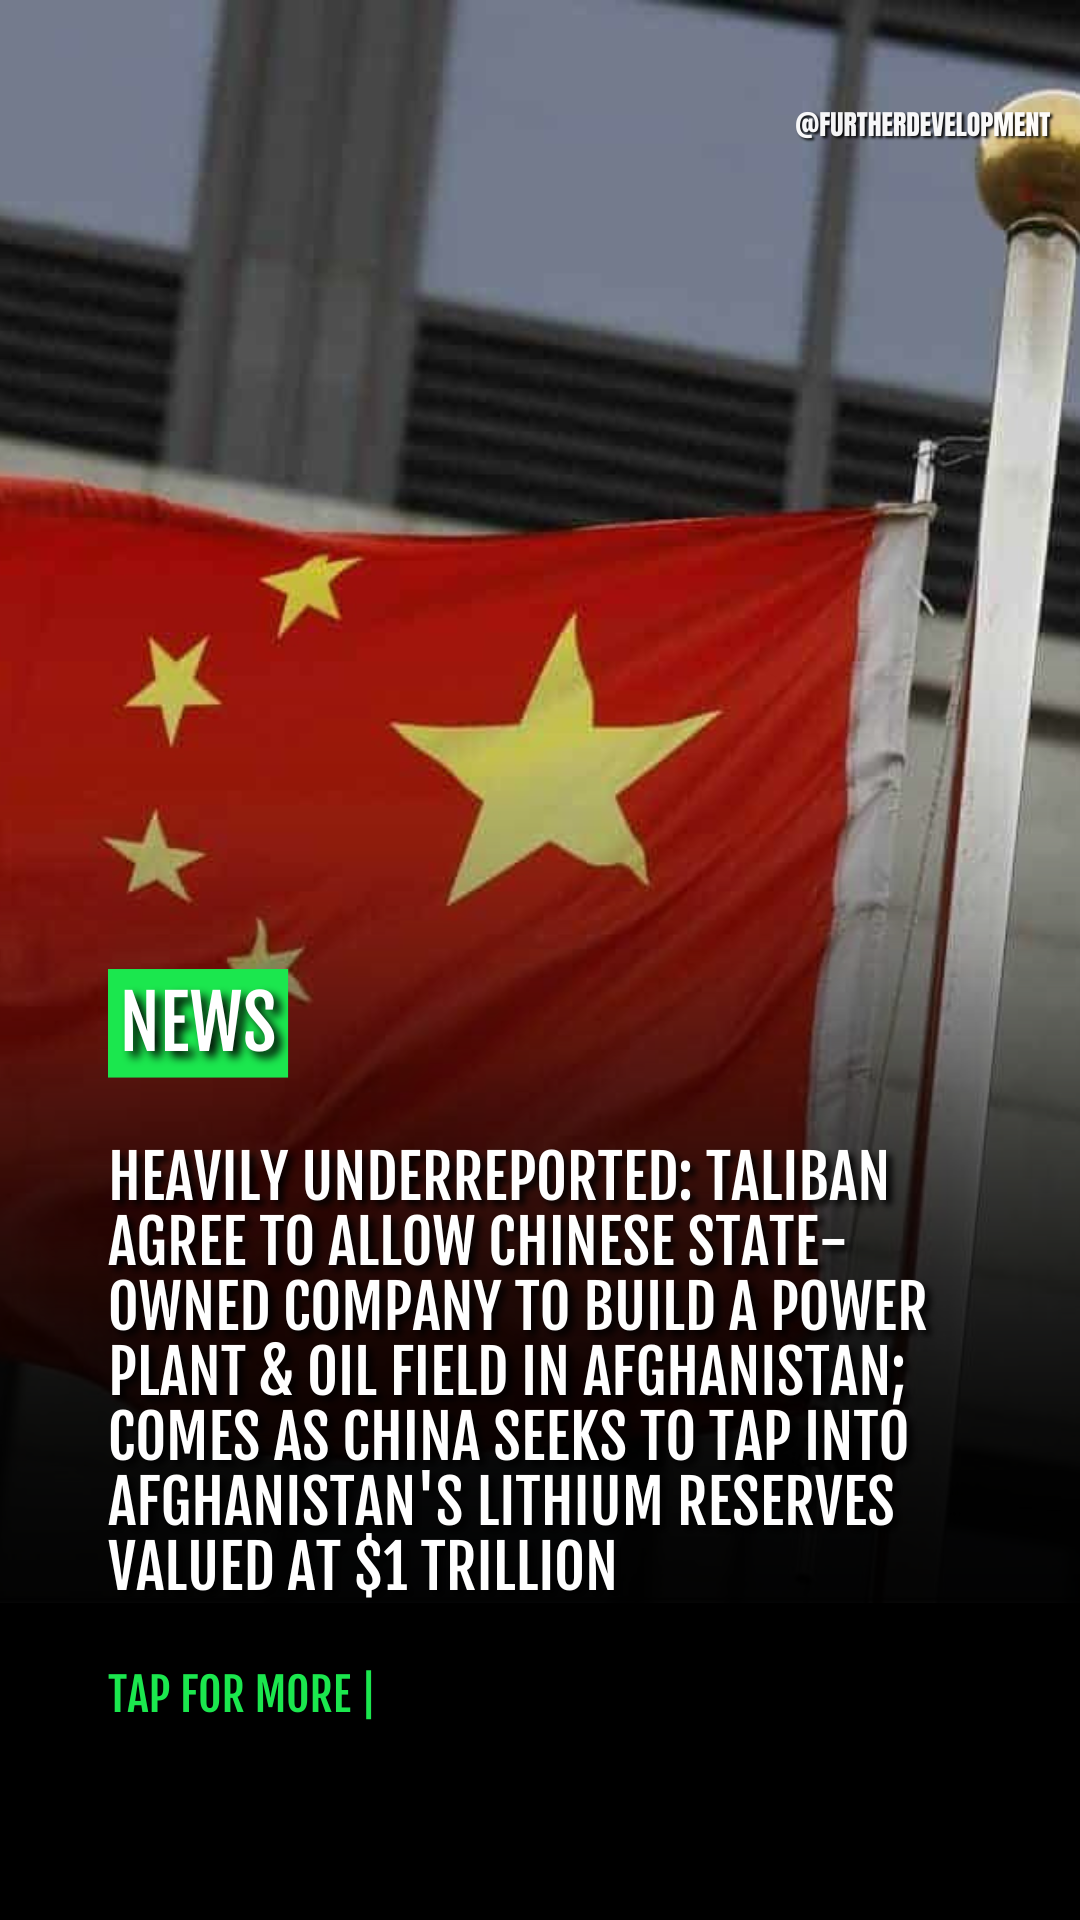 Heavily Underreported: Taliban agree to allow Chinese state-owned company to build a power plant & oil field in Afghanistan; comes as China seeks to tap into Afghanistan's lithium reserves valued at $1 trillion